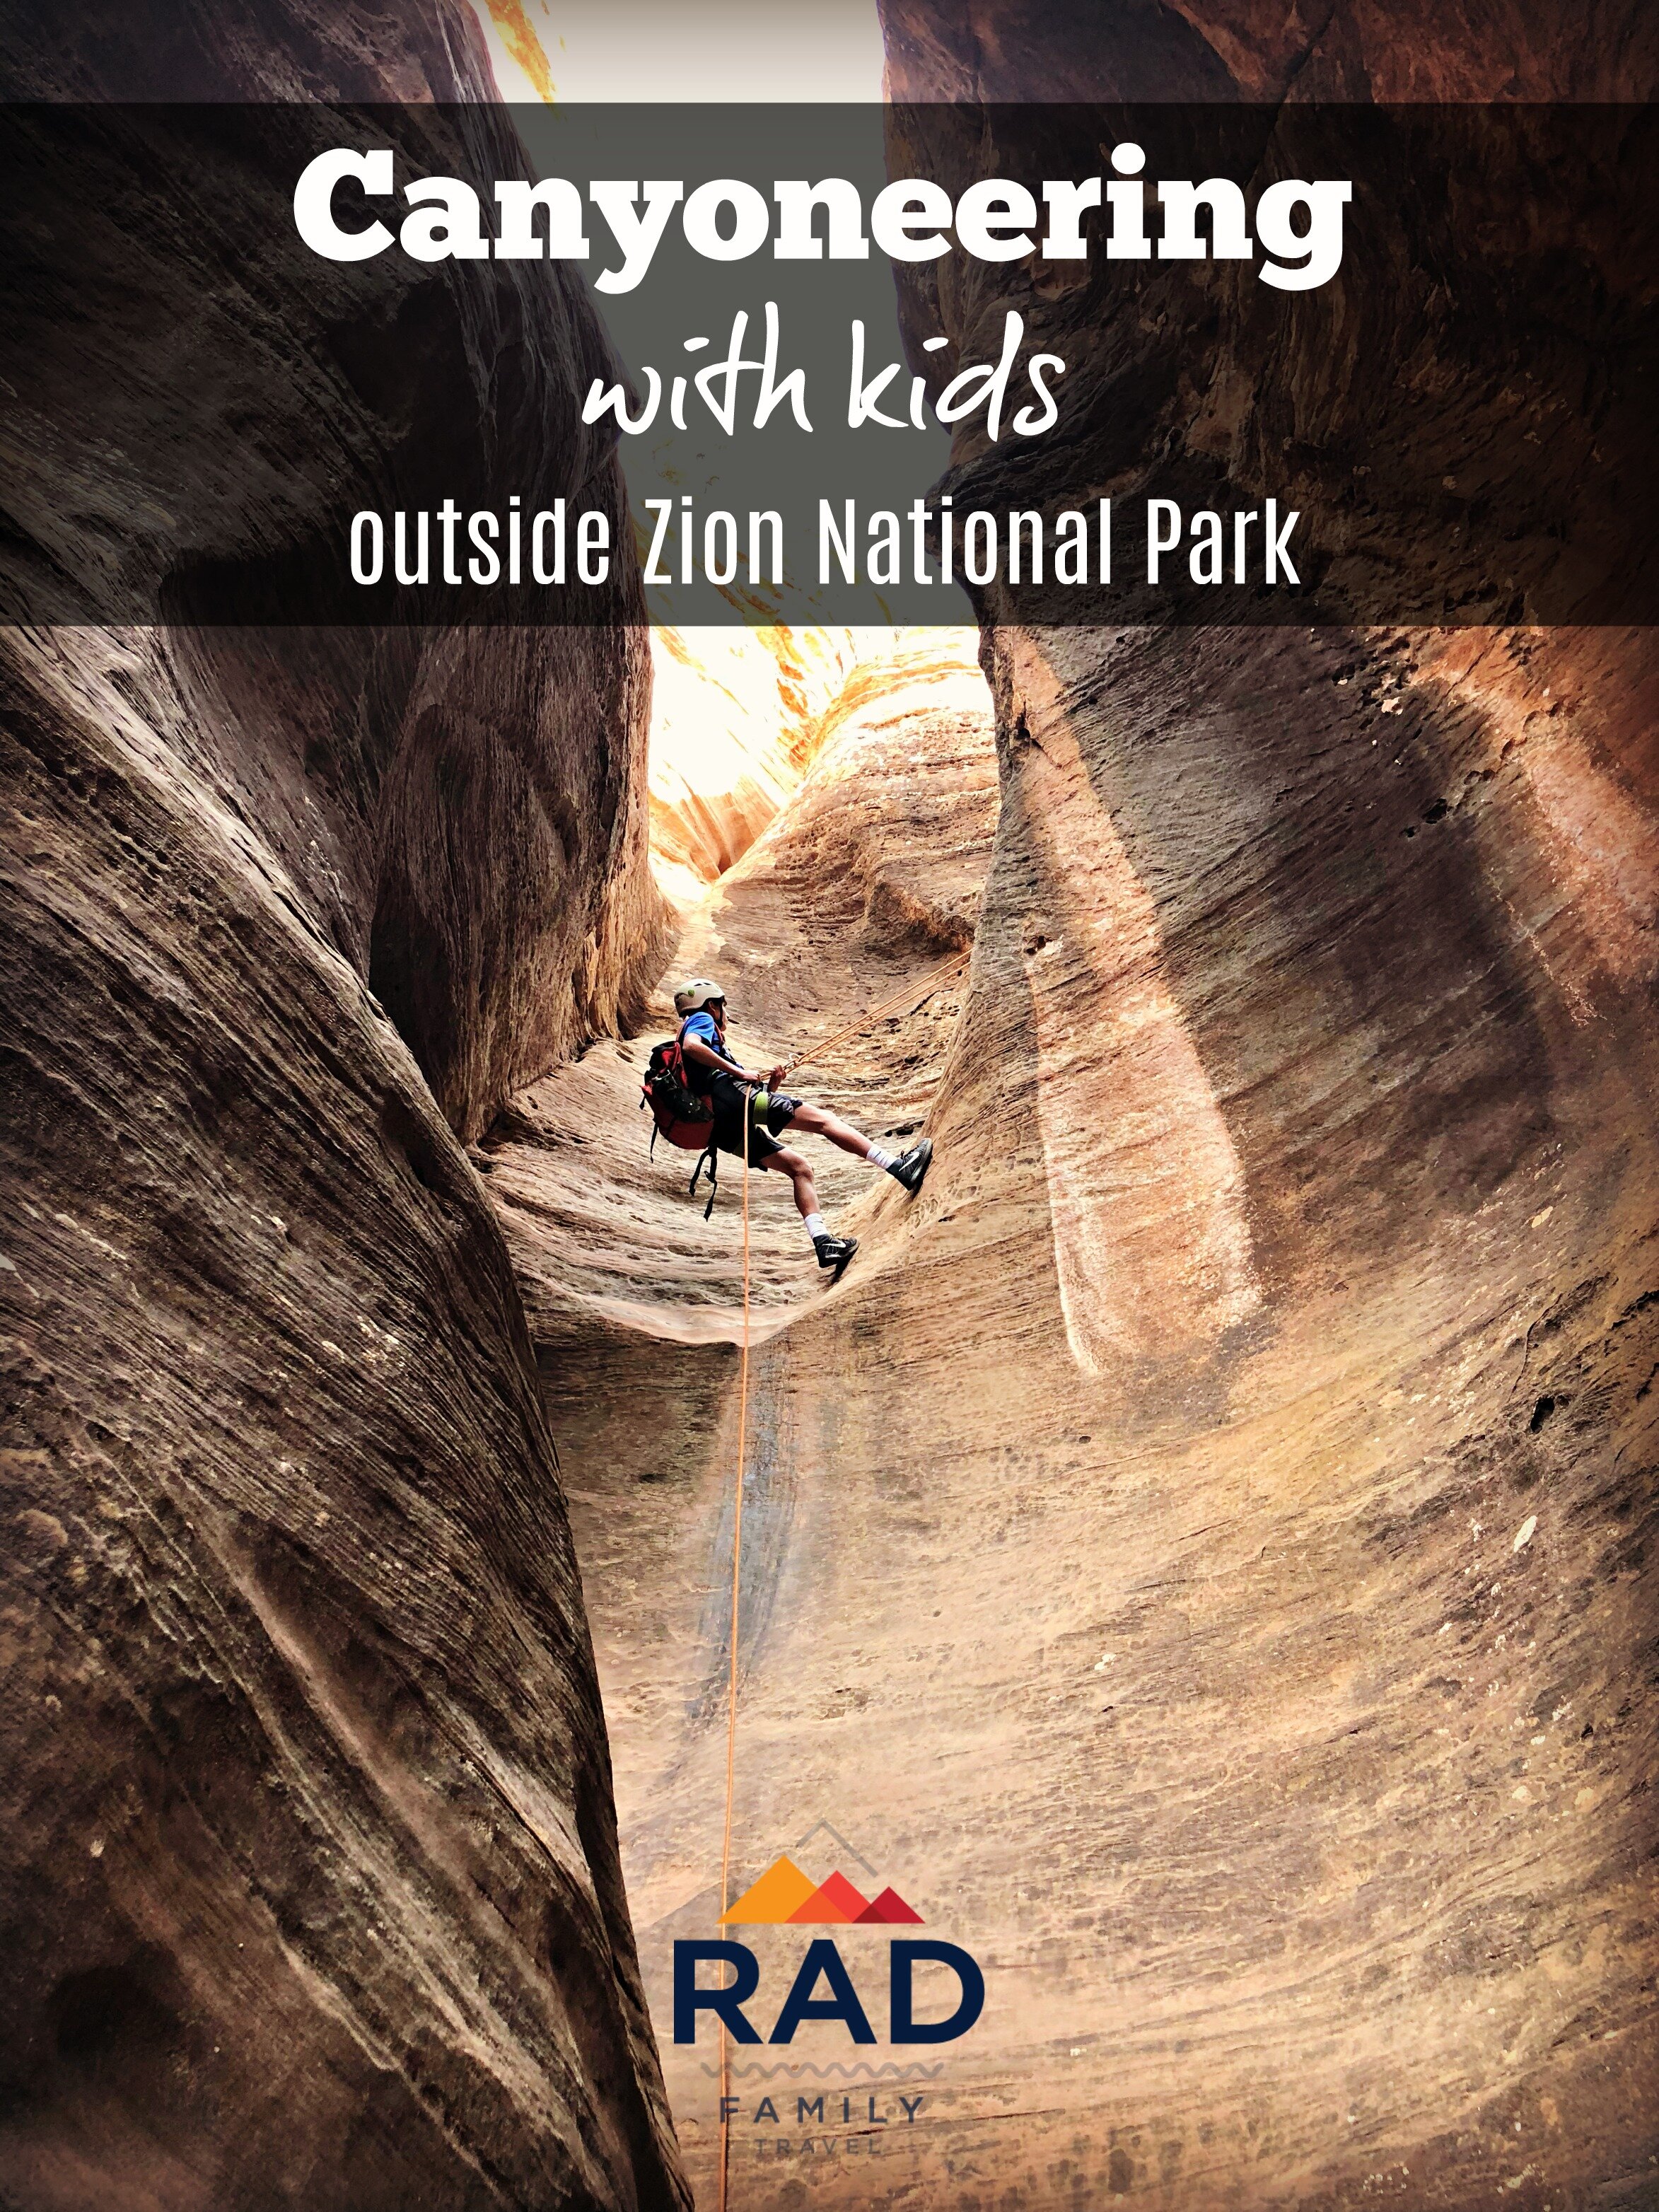 Zion National Park Canyoneering with kids